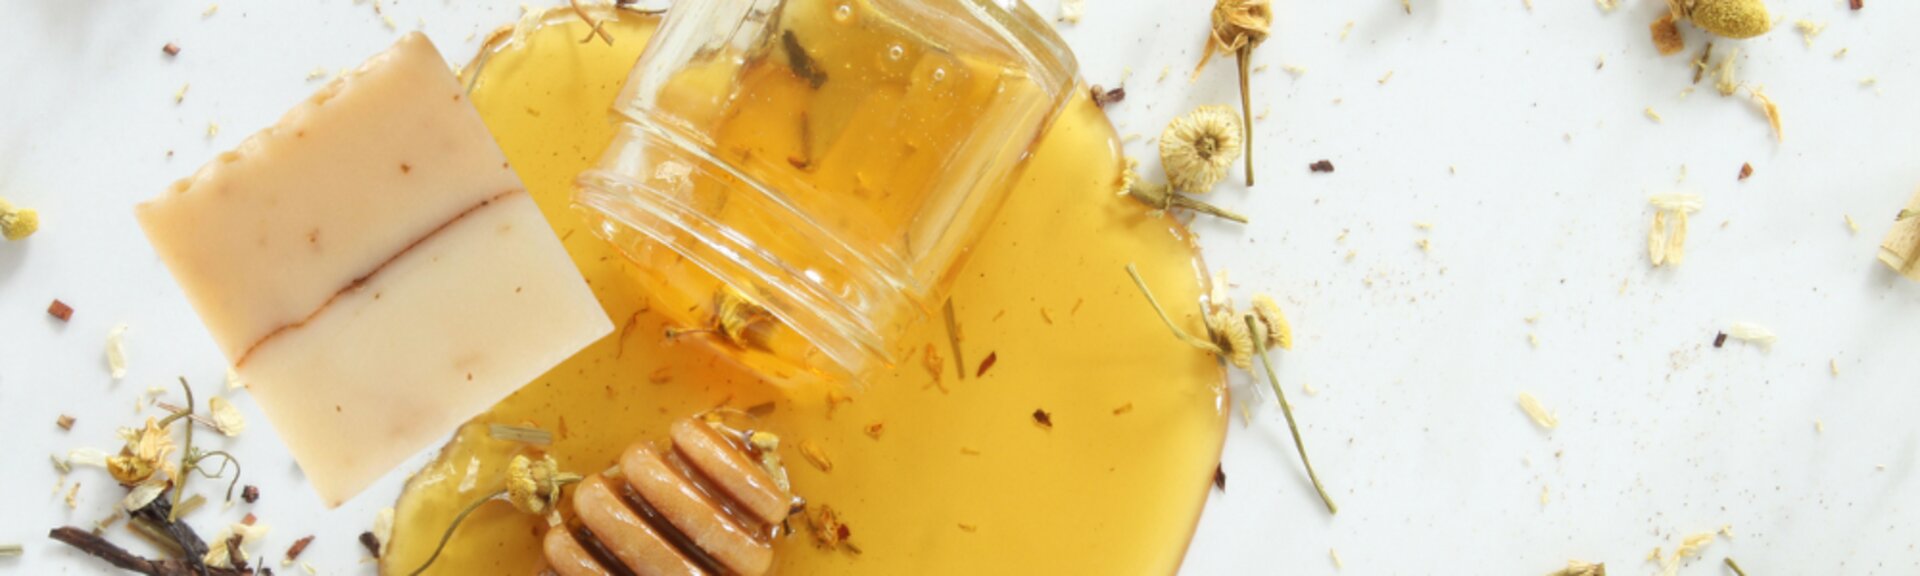 Embracing Nature for Skin Relief: Honey and Oatmeal for Eczema